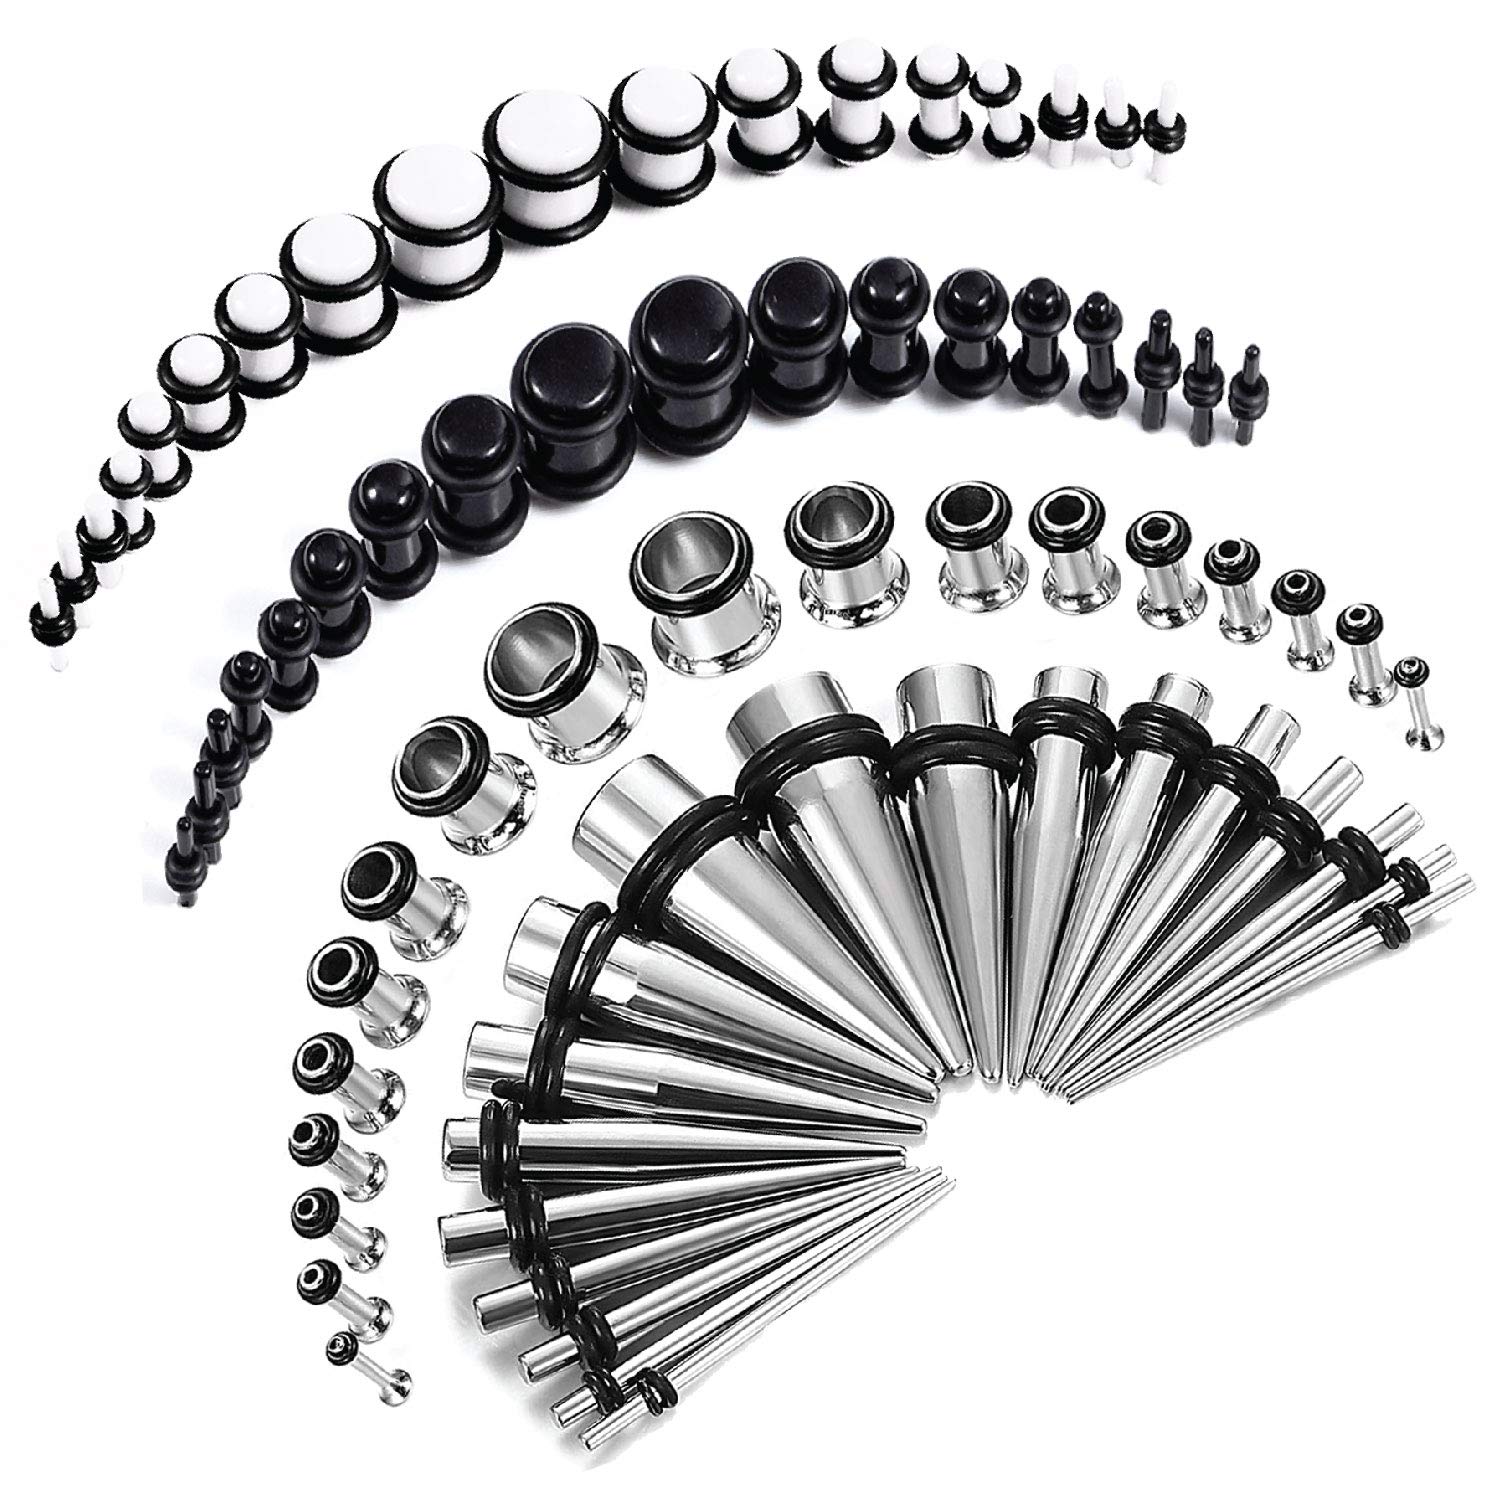 BodyJ4You 72PC Ear Stretching Gauges Kit 14G-00G - Surgical Steel Tapers Single Flare Tunnels Acrylic Plugs - Stretchers Expanders Eyelets